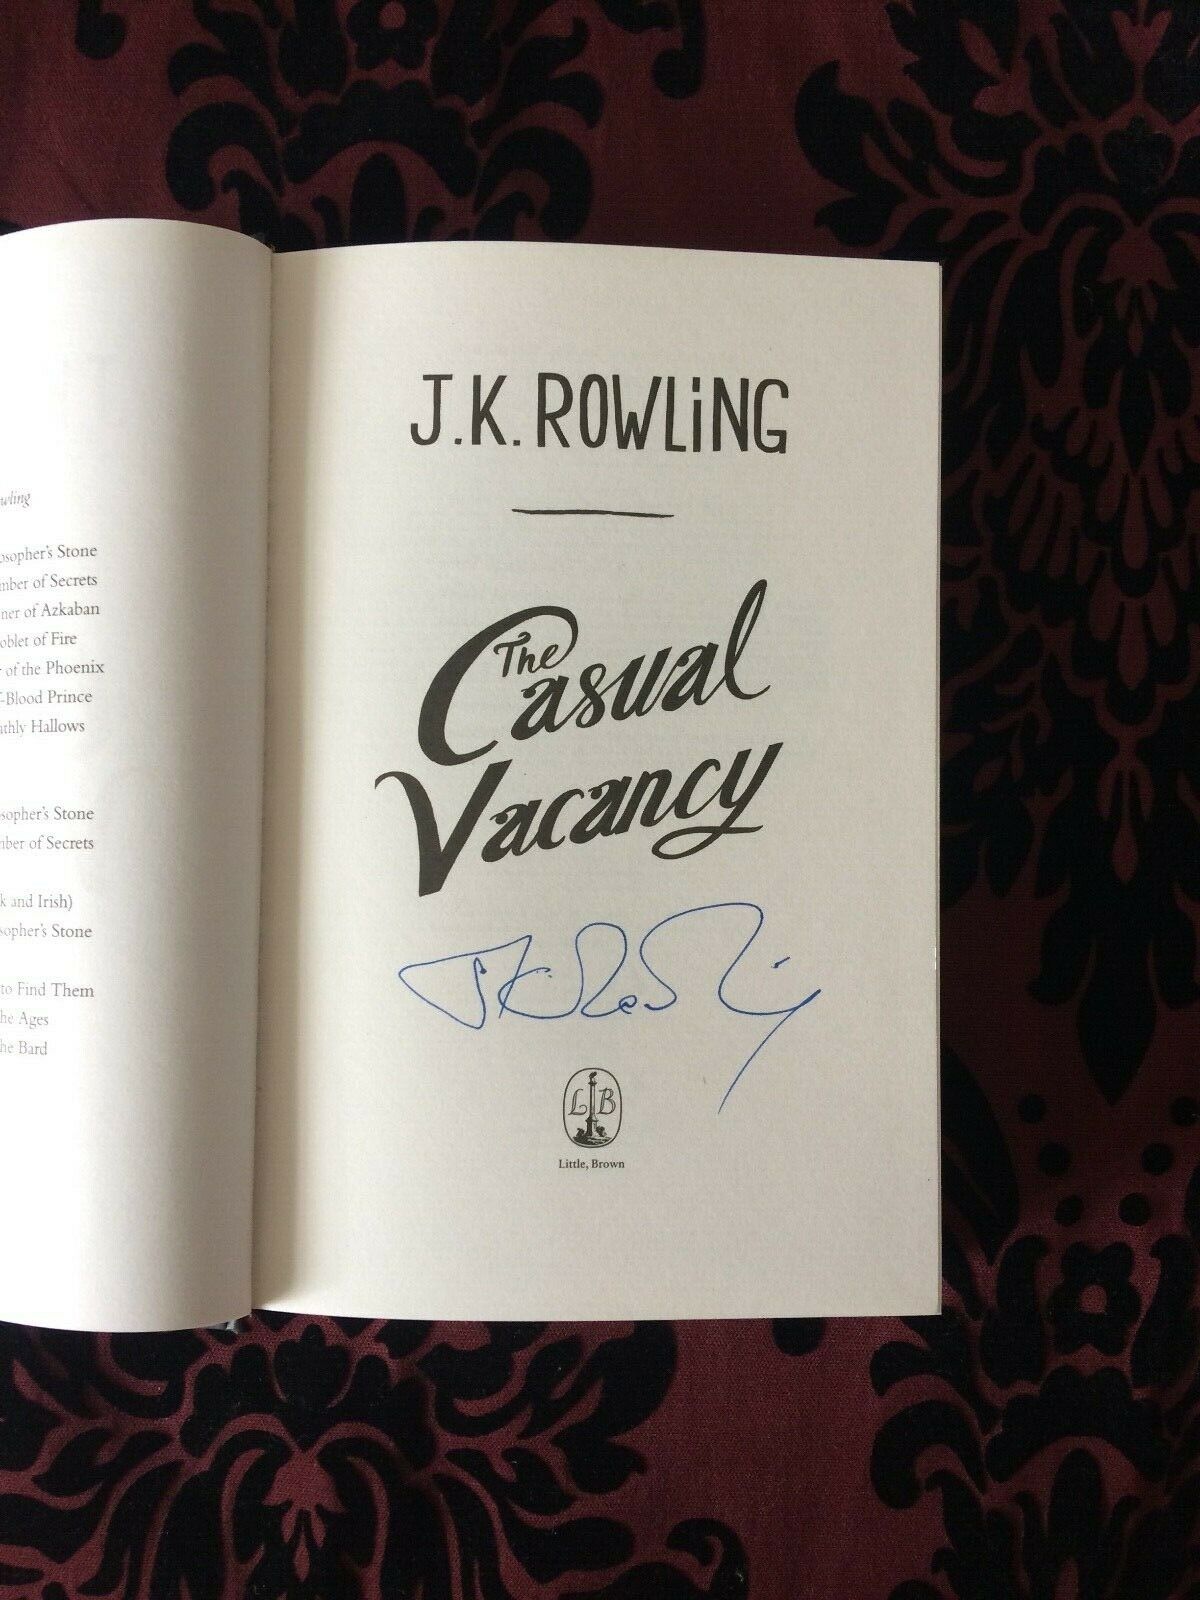 J.K. Rowling signature forgery found inside a Casual Vacancy. Sold on eBay by MColes78